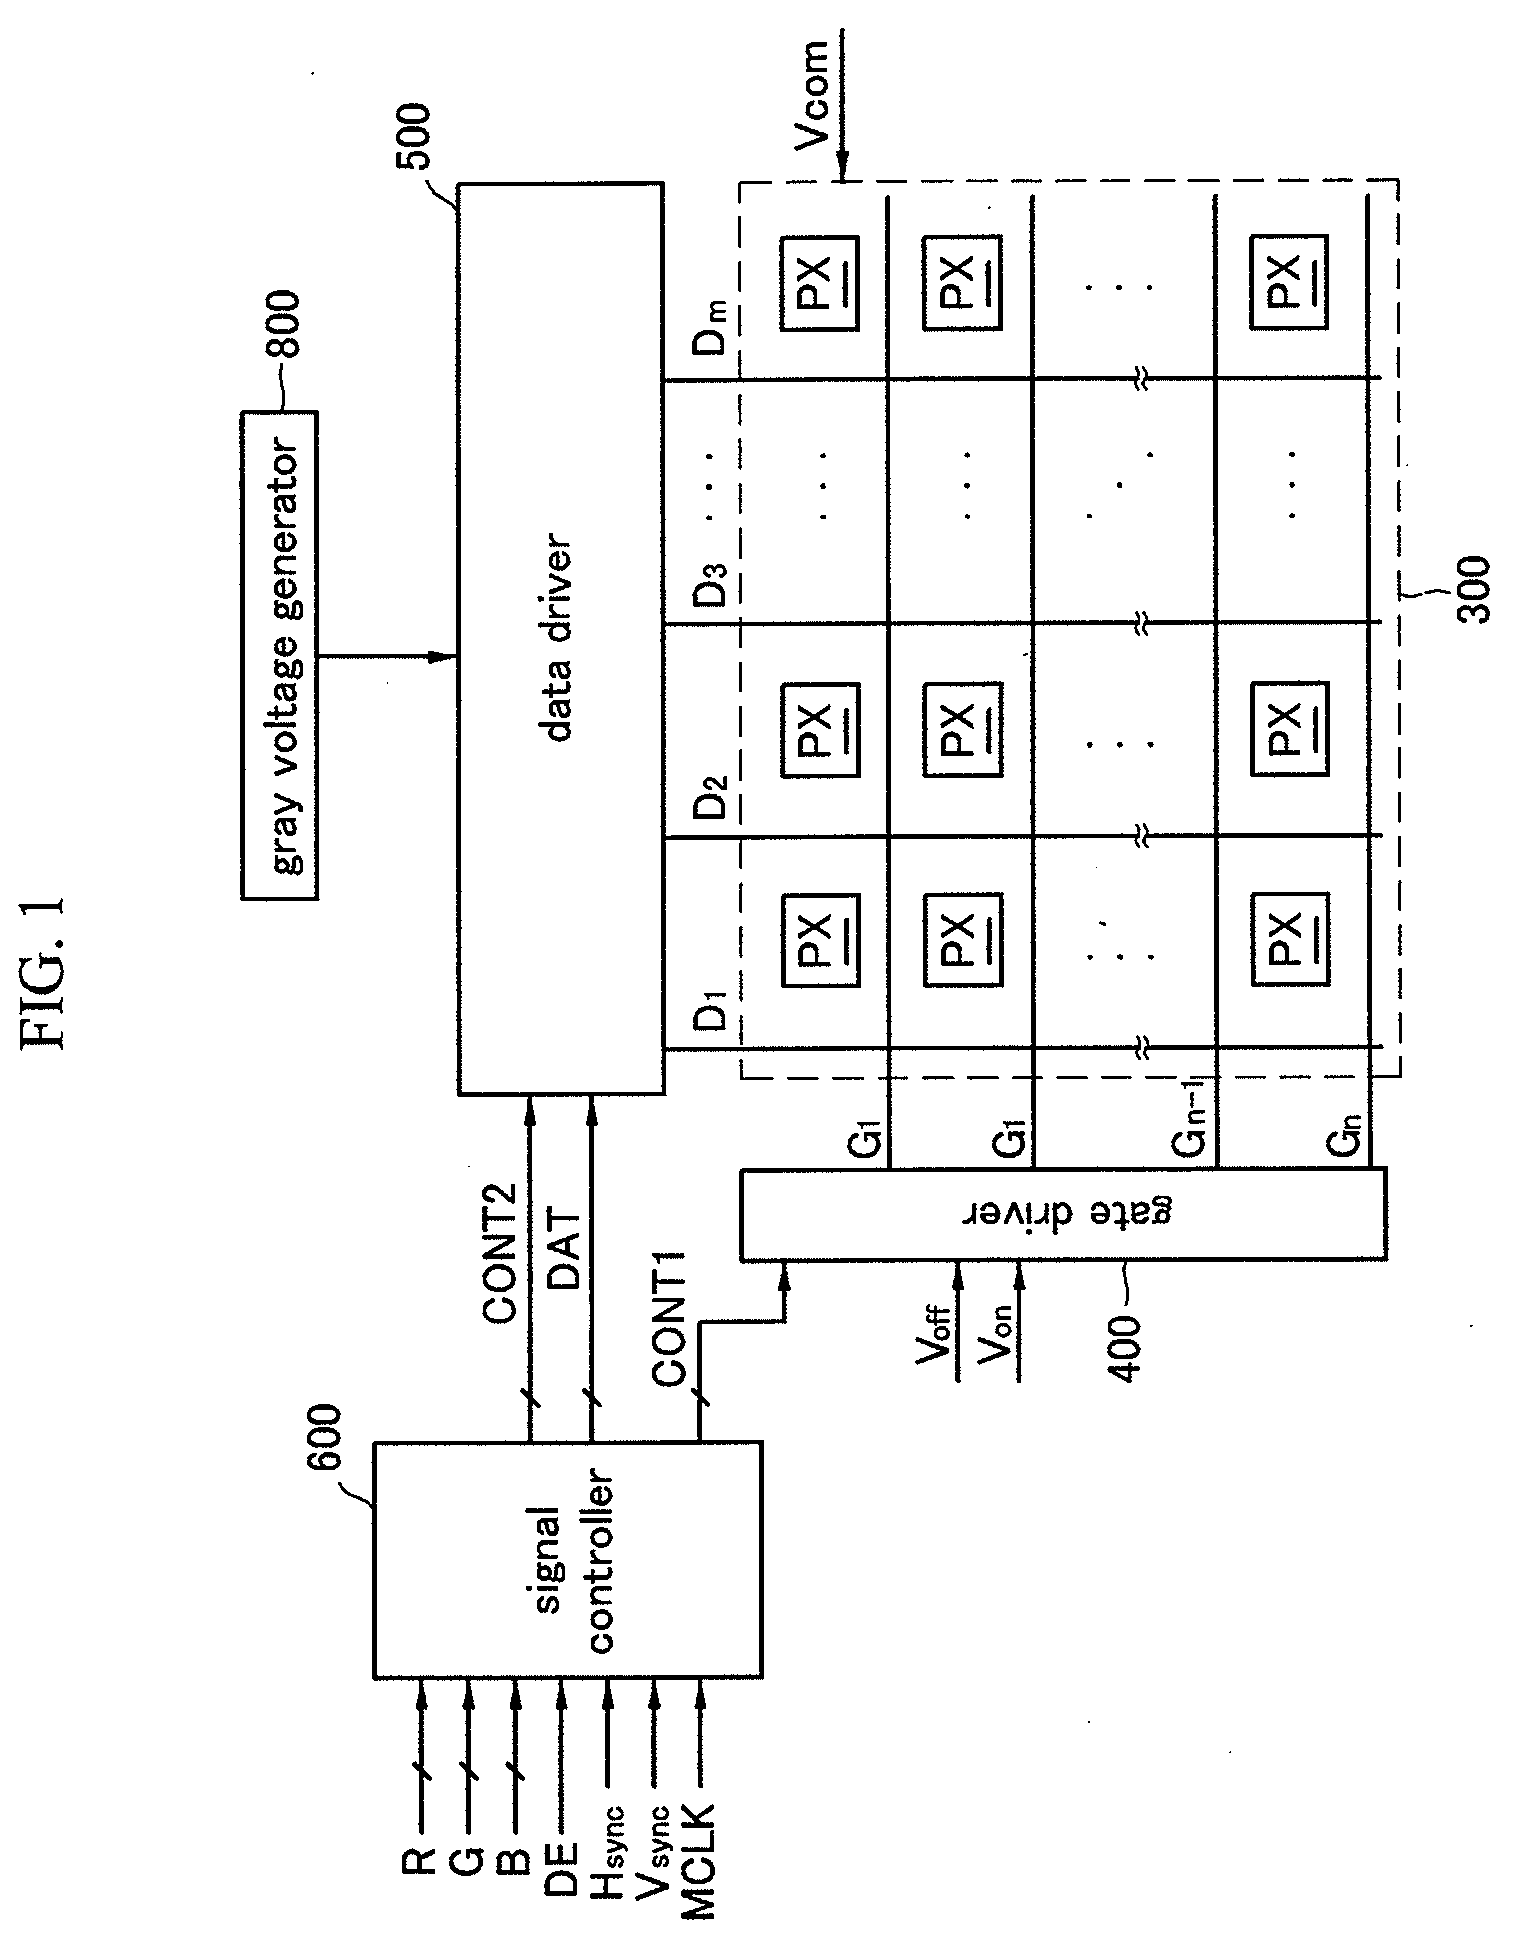 Display device including integrated touch sensors